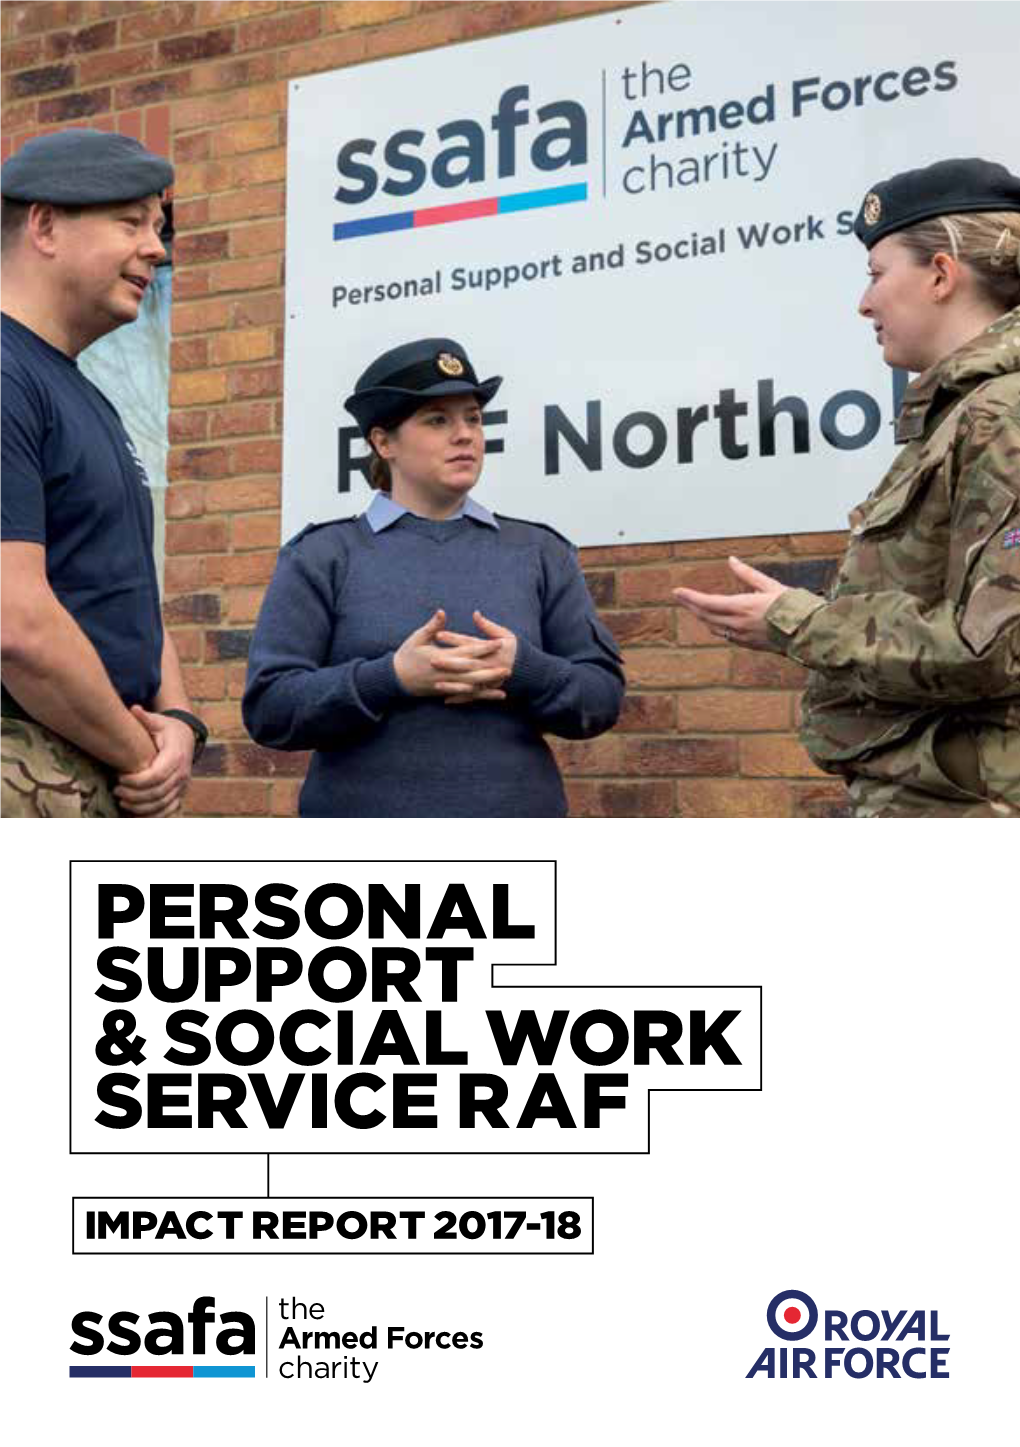 Personal Support & Social Work Service